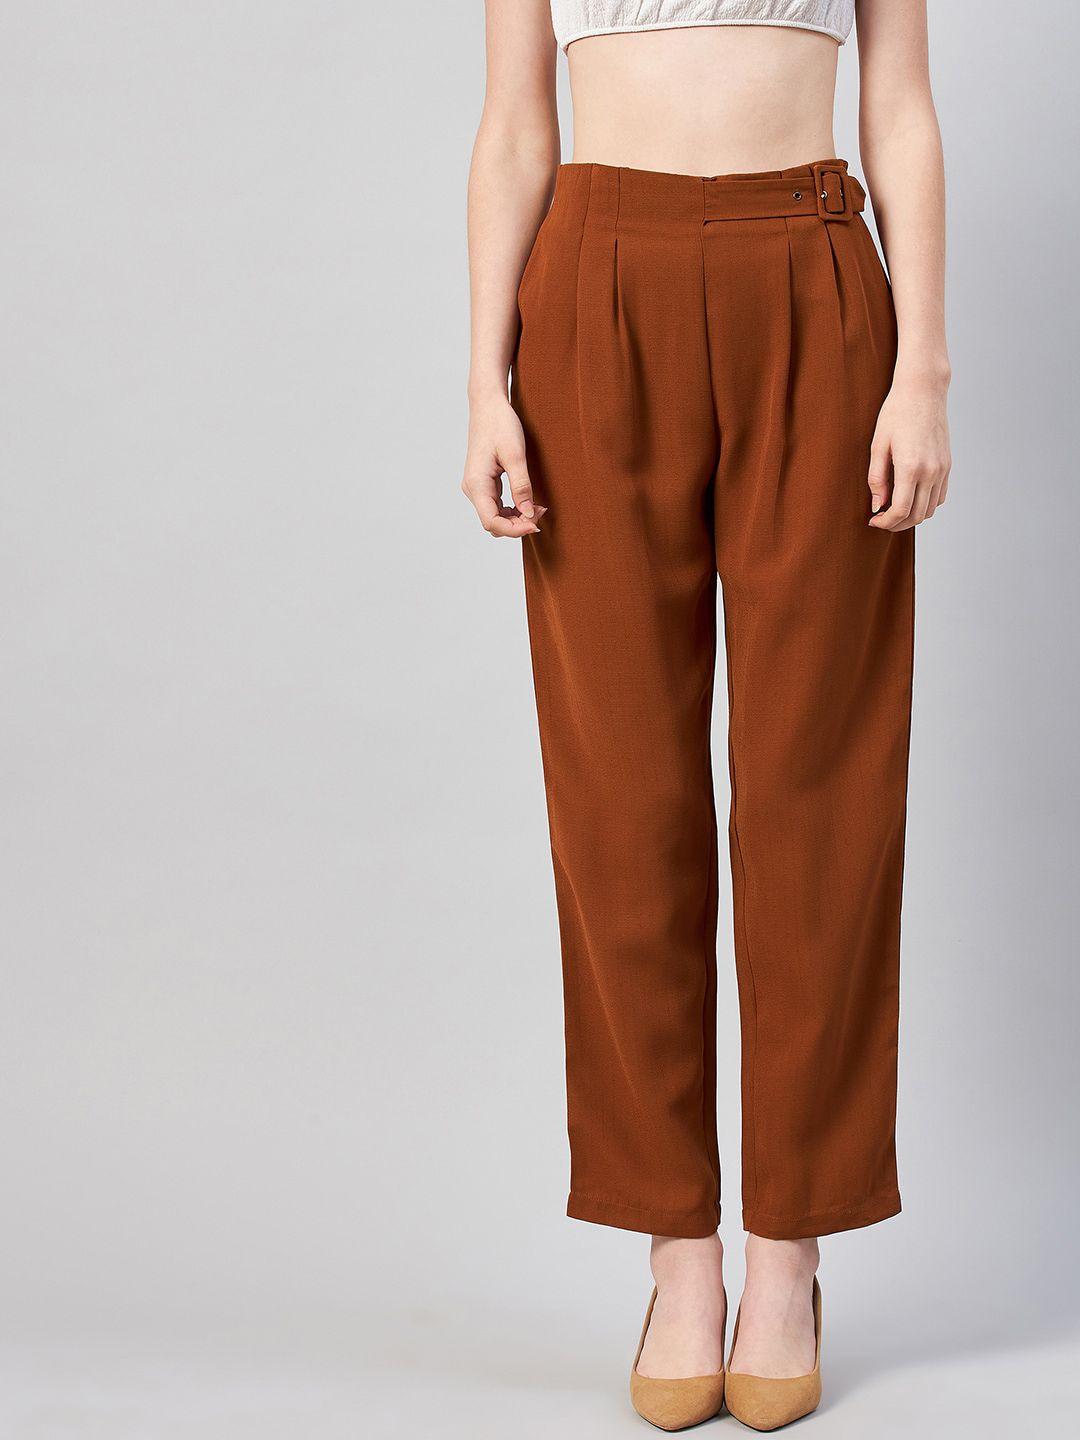 marie claire women tan pleated trousers